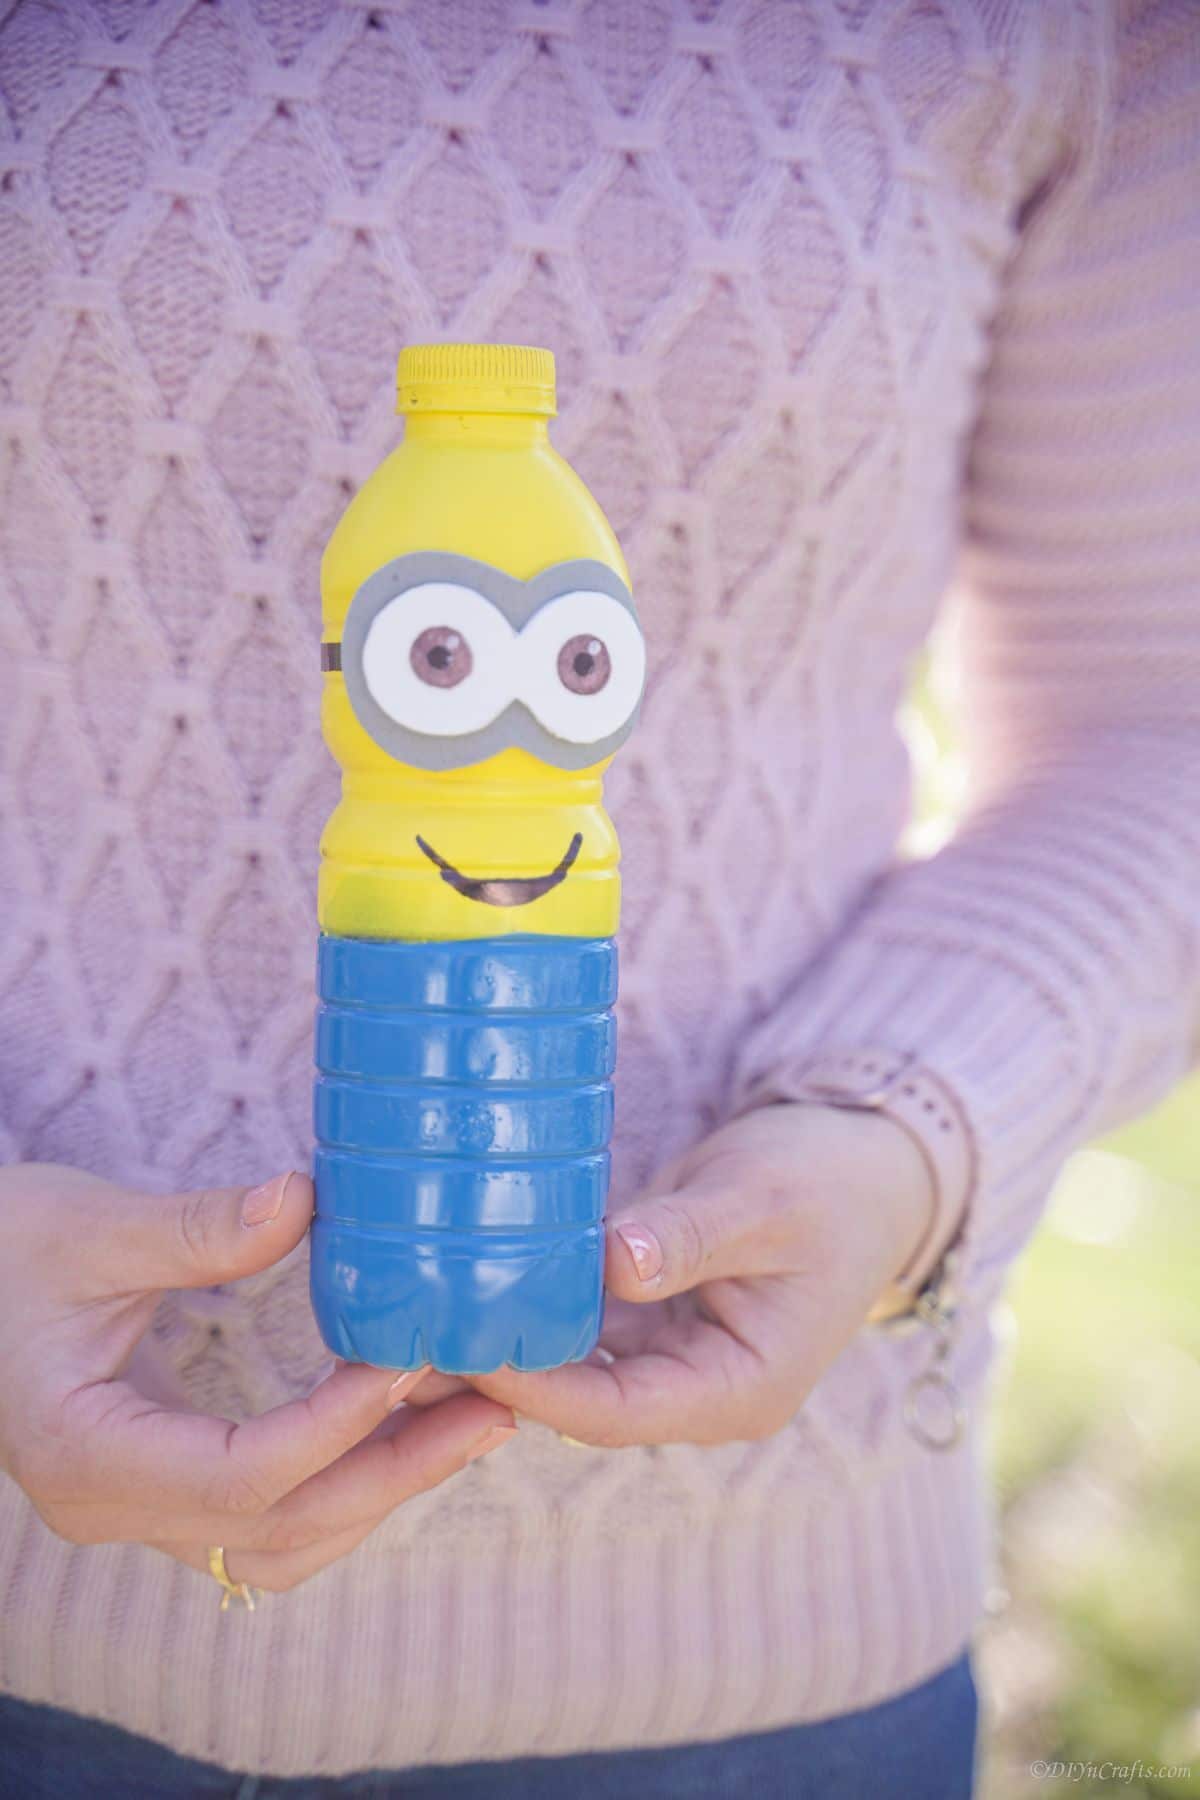 lady in pink sweater holding plastic bottle minion